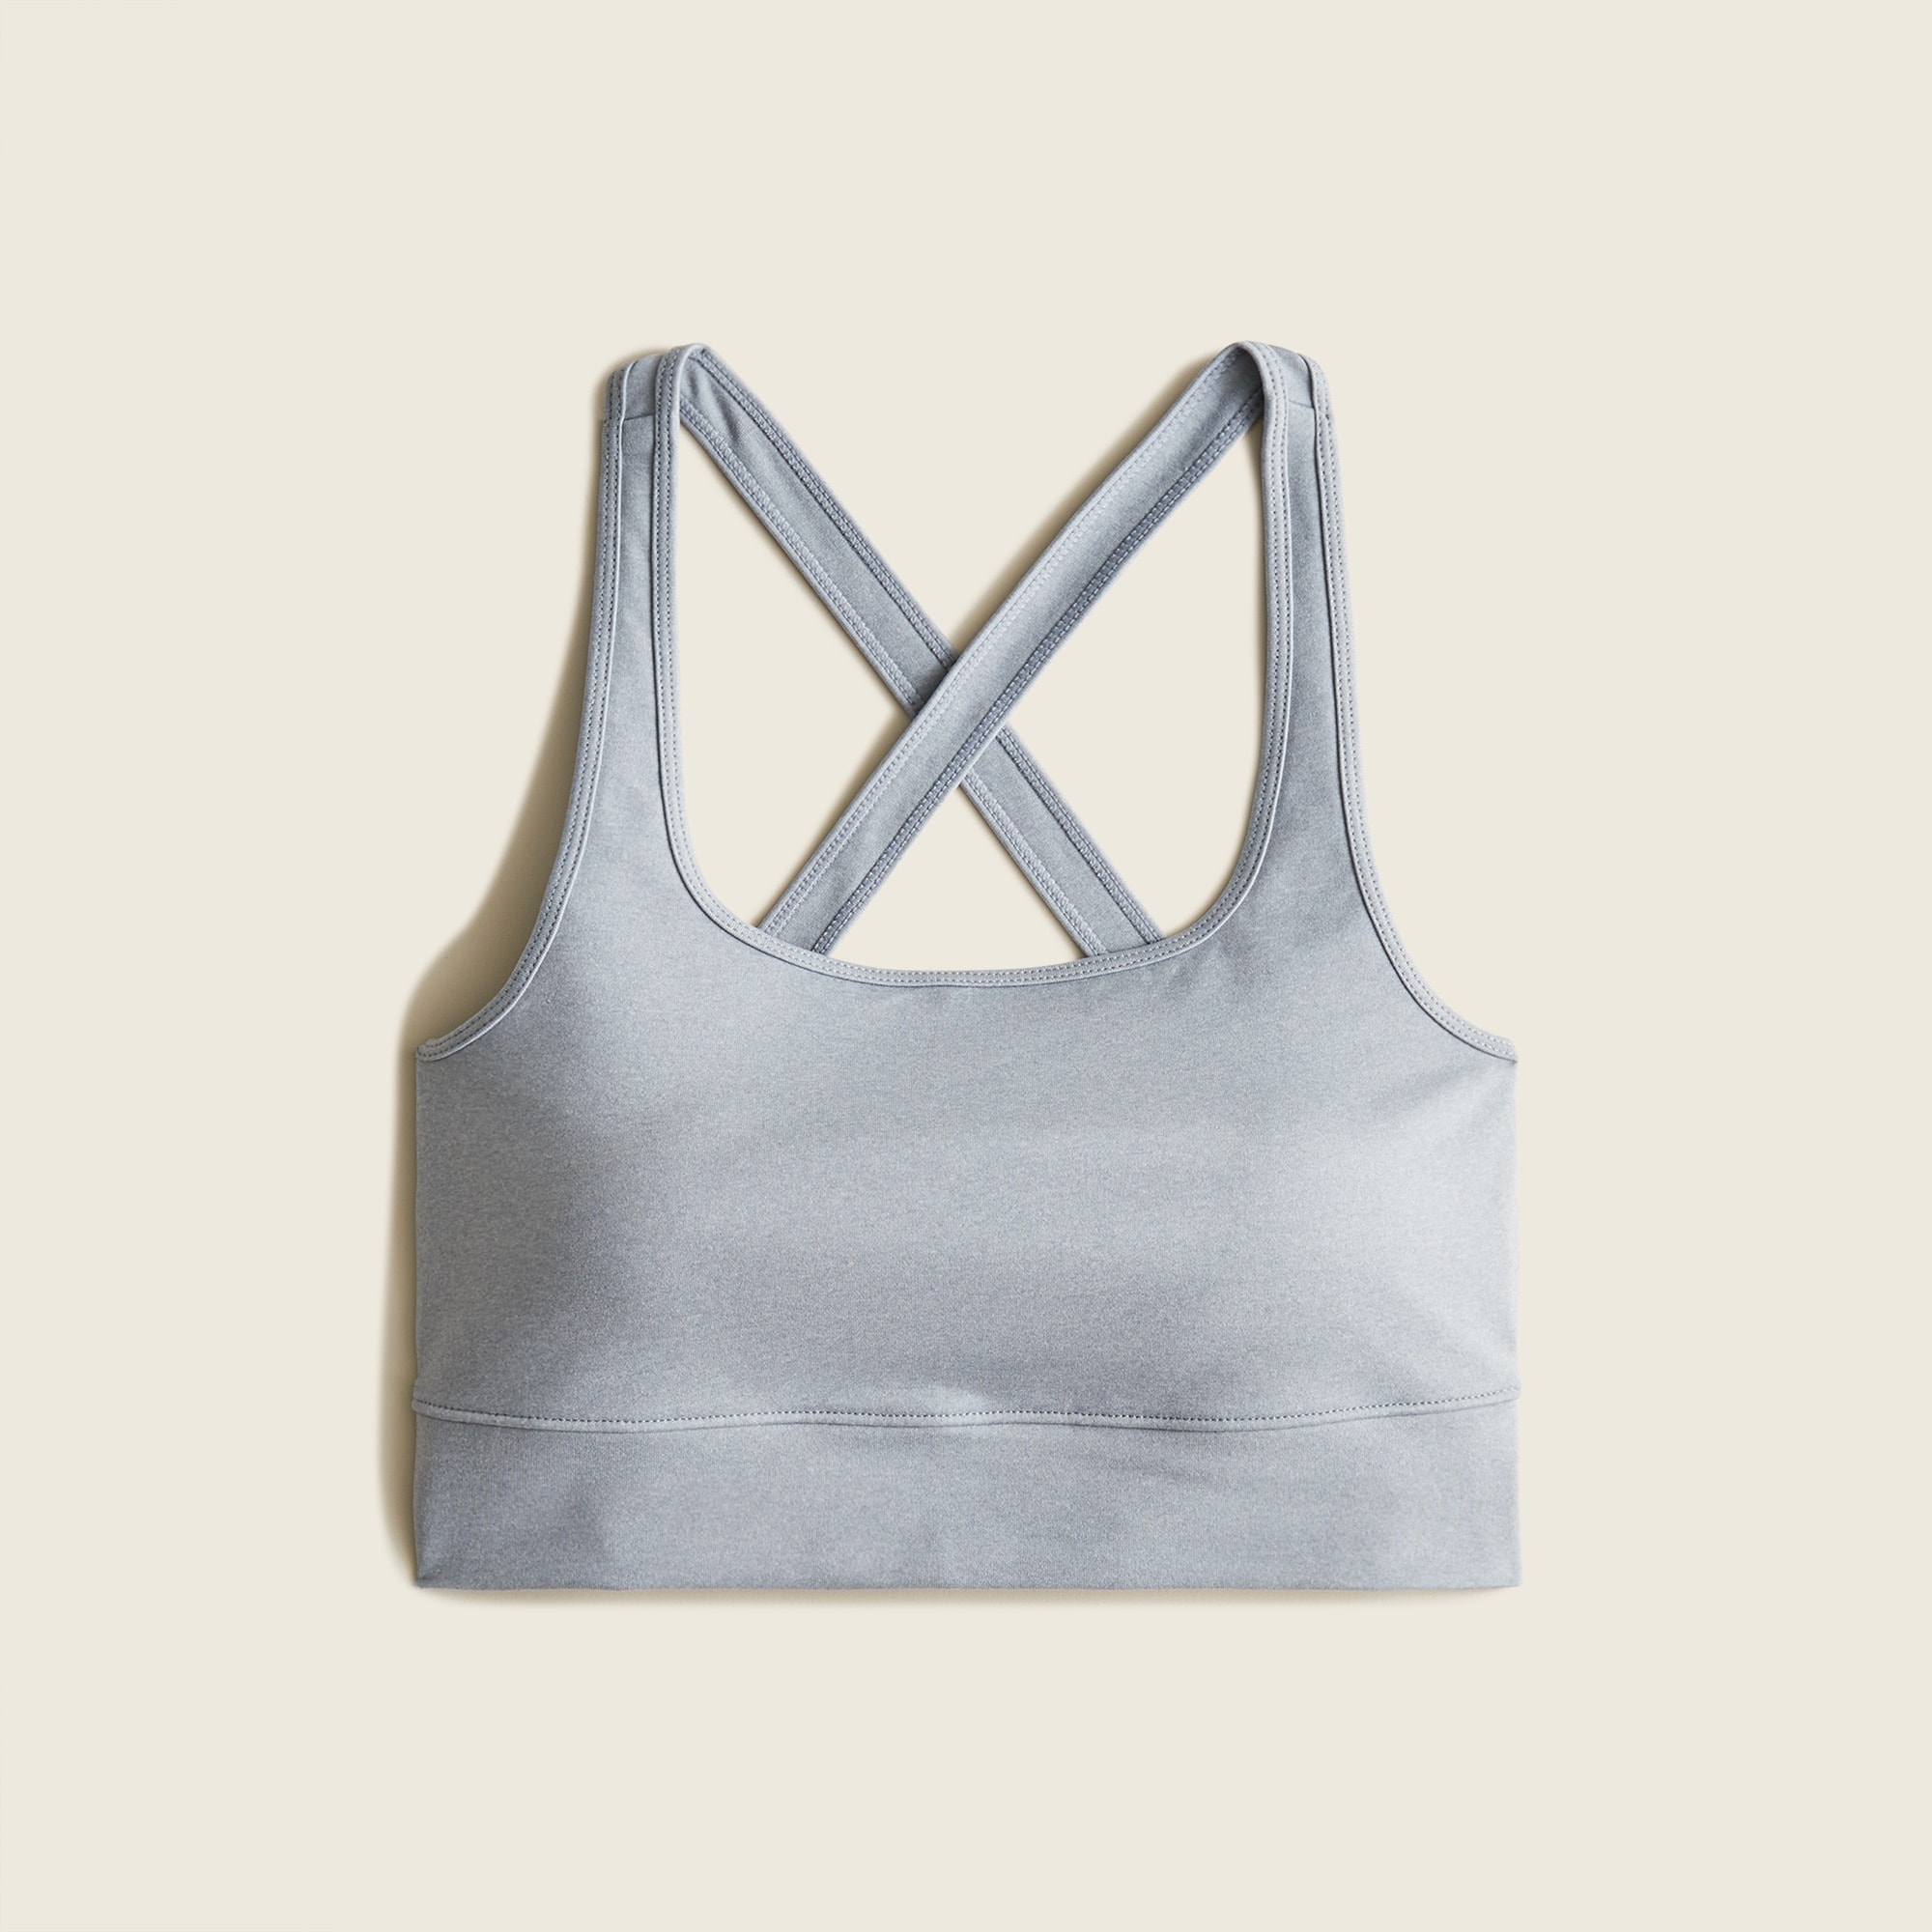 J.Crew NWT j tee x new balance sports bra small - $23 New With Tags - From  Brittany